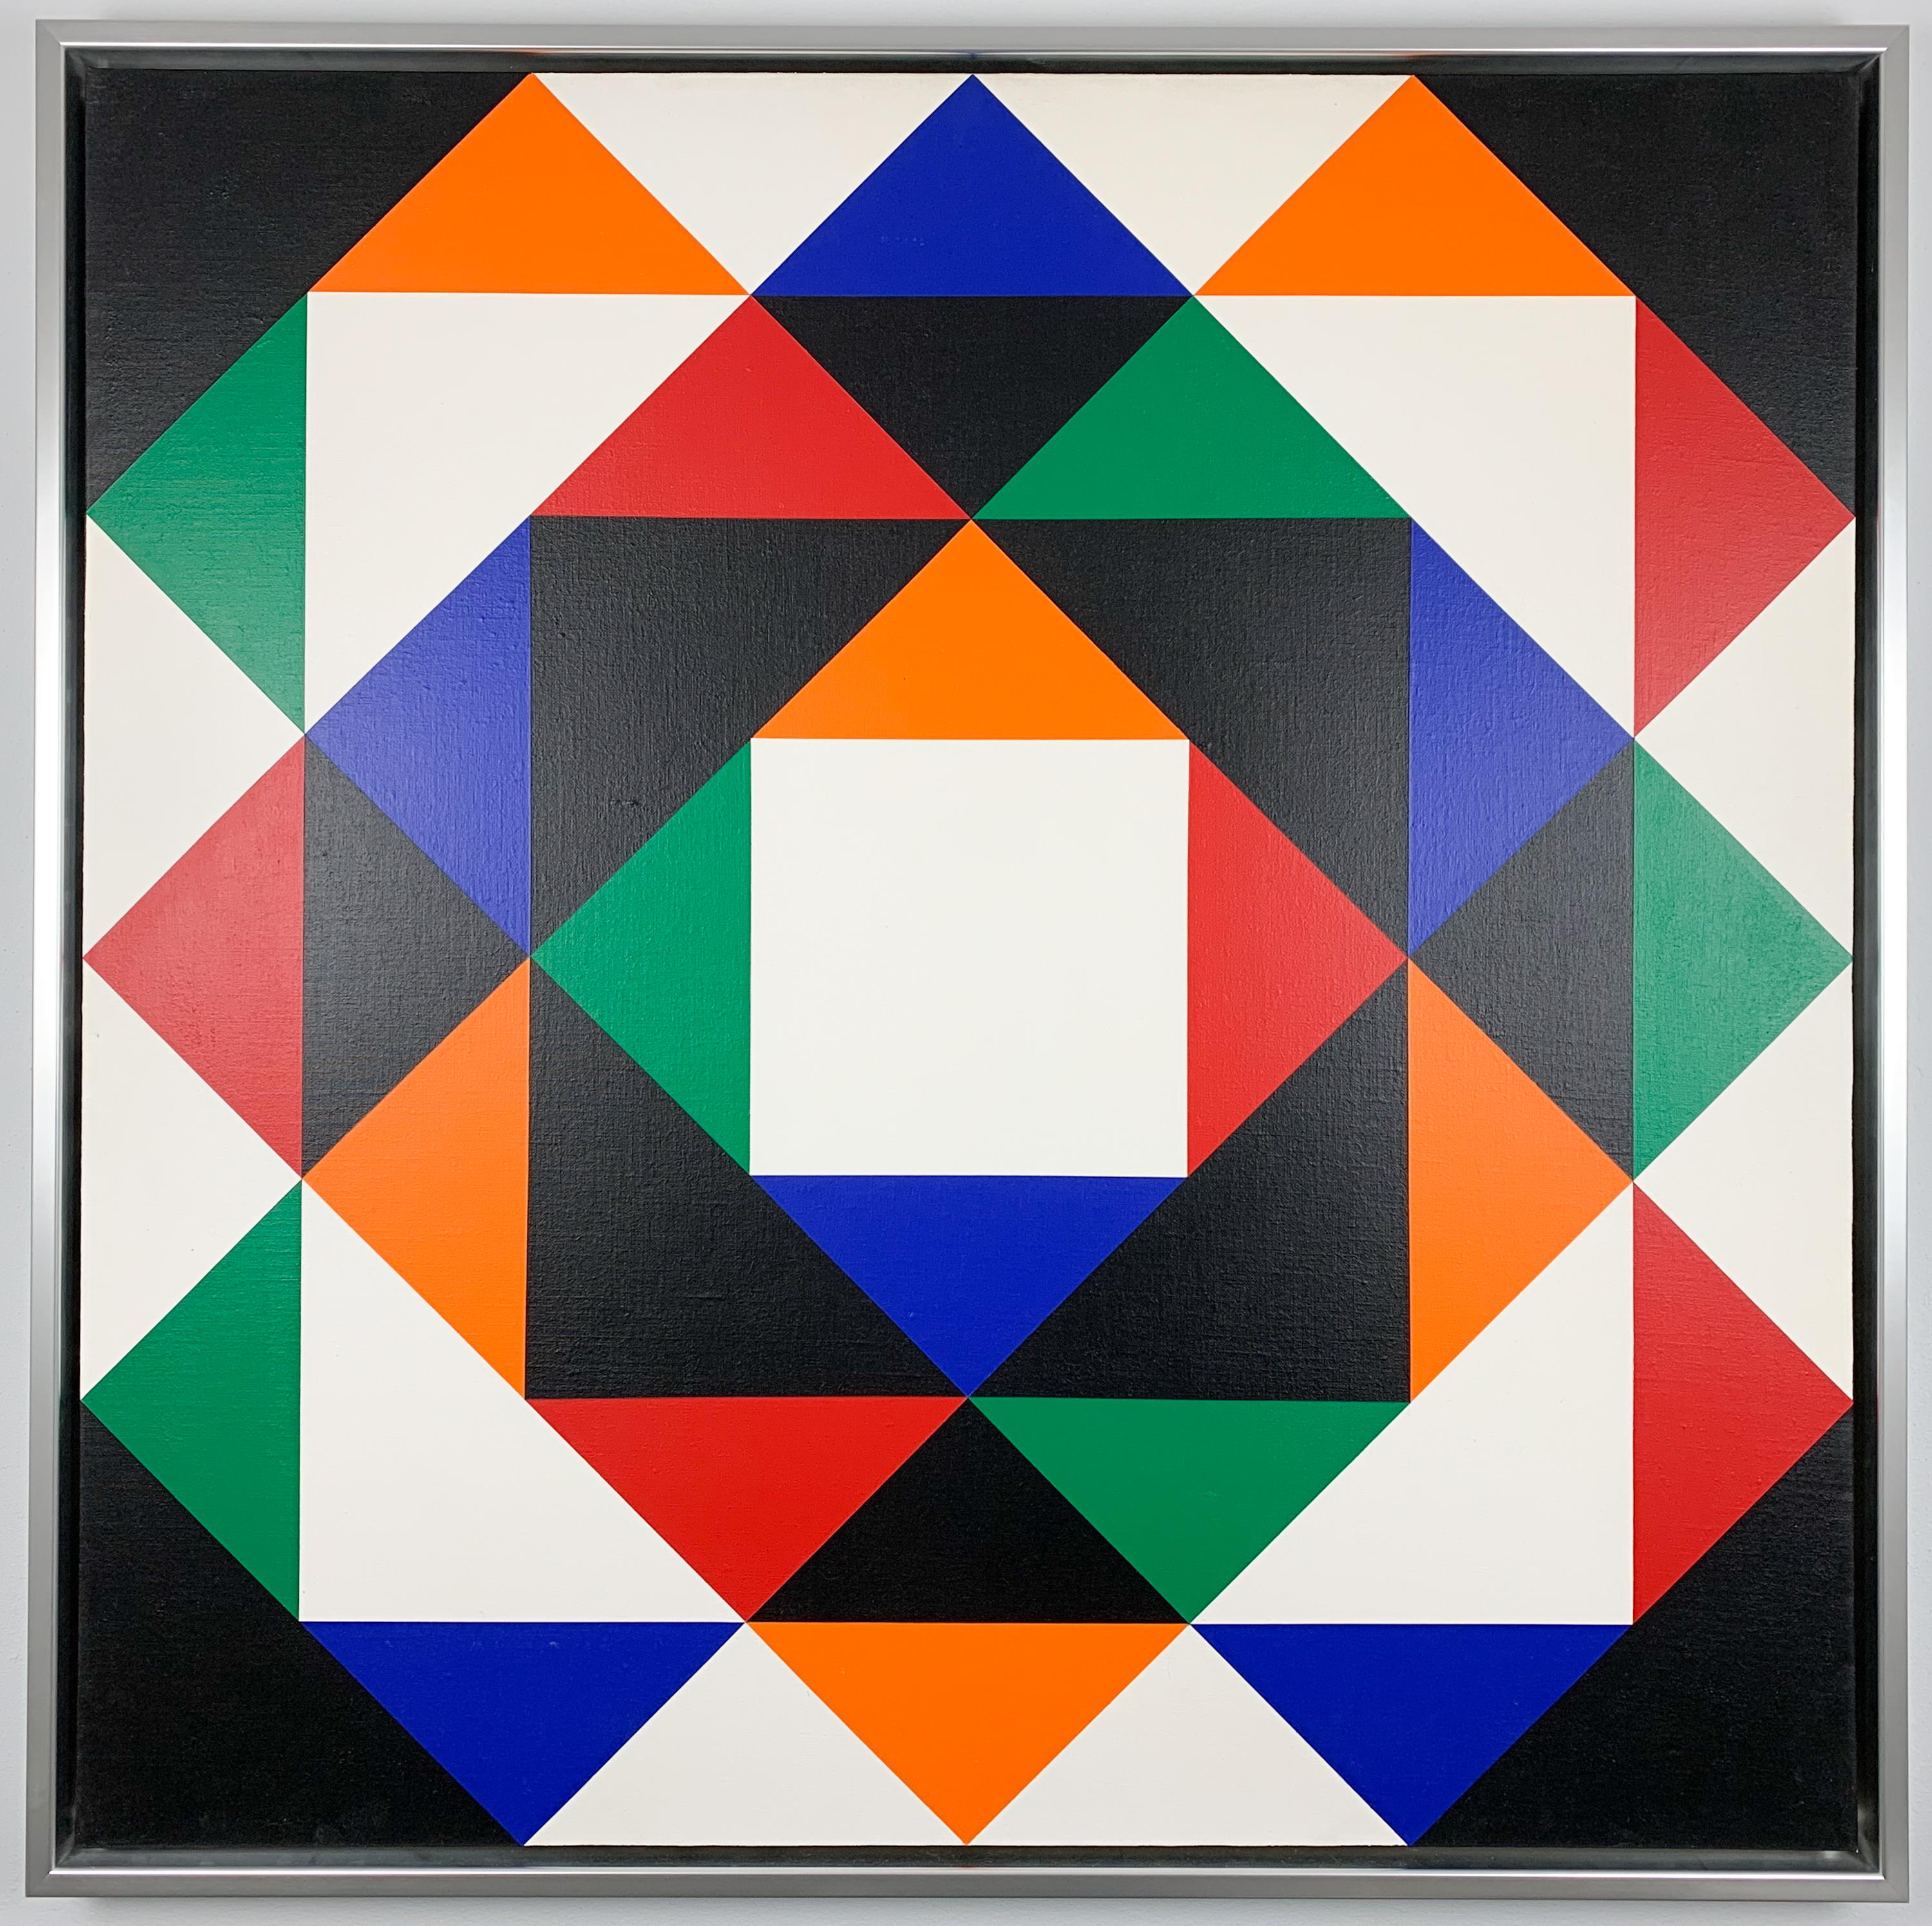 Hans Jørgen Hvid - Large geometric abstract painting - Acrylic on canvas, framed

Artist
Hans Jørgen Hvid (Viborg, Denmark 1945 - ) is a contemporary Danish artist, known for his Concrete-Art paintings.

Concrete art is an art movement with a